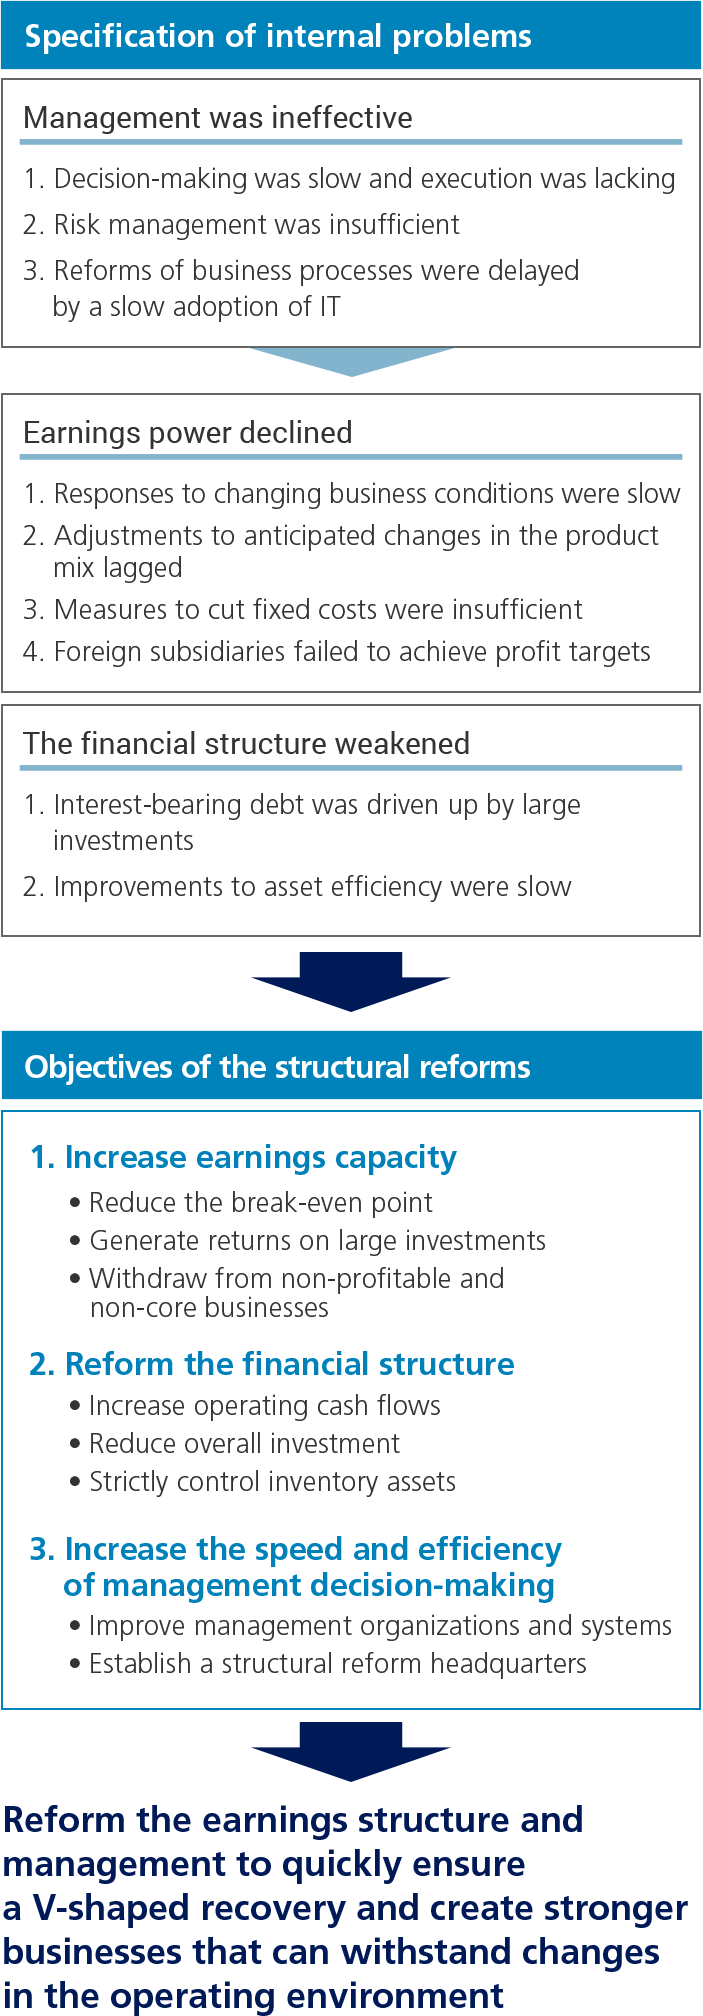 Process of formulating the structural reforms